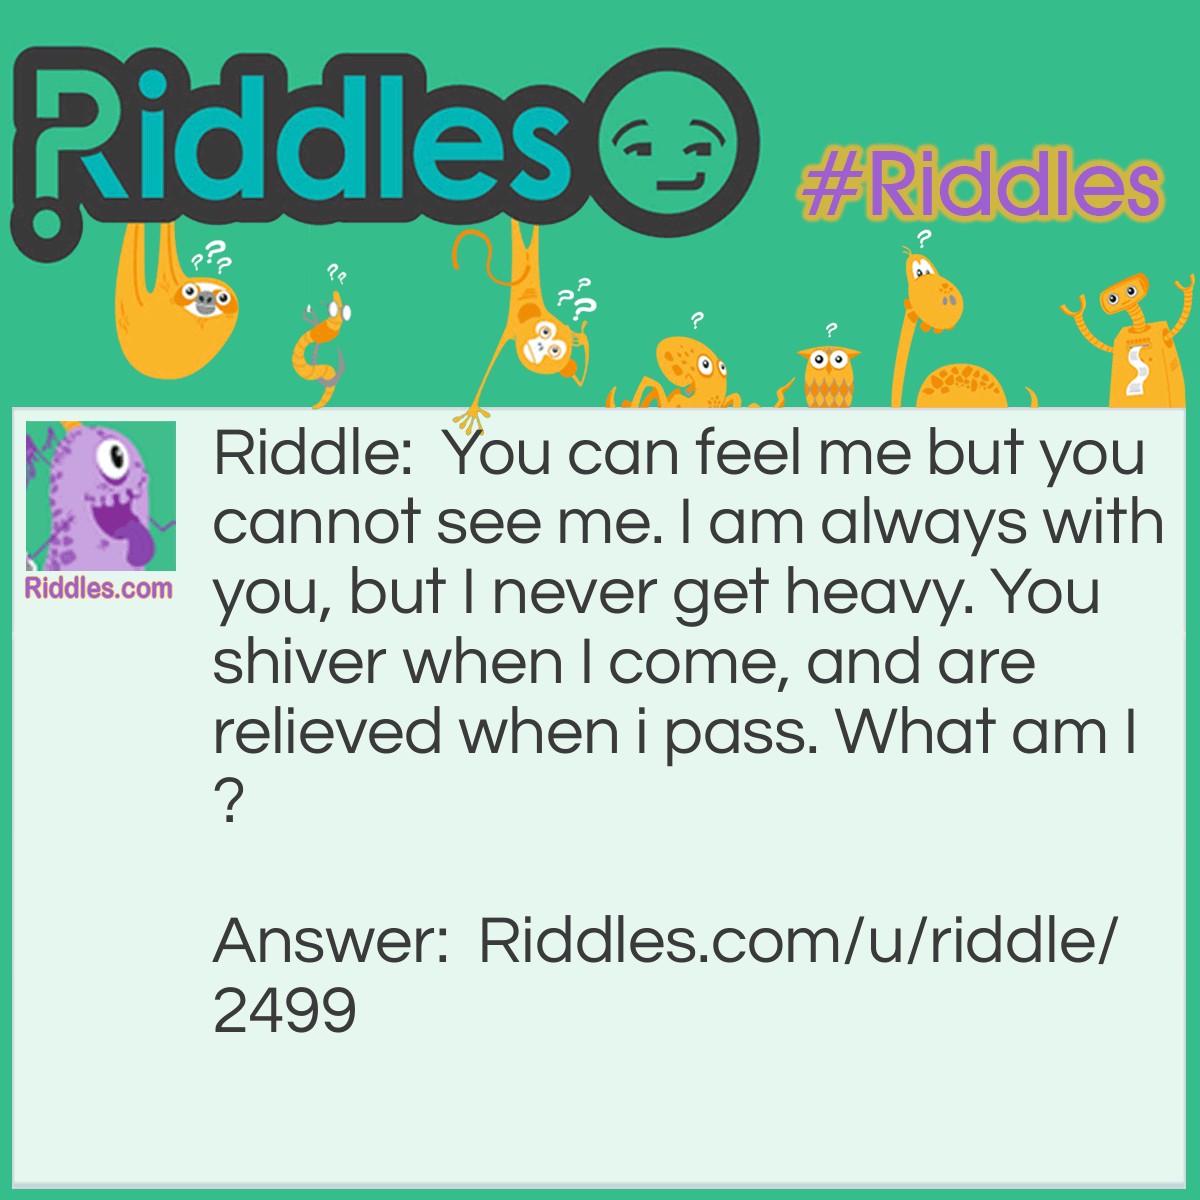 Riddle: You can feel me but you cannot see me. I am always with you, but I never get heavy. You shiver when I come, and are relieved when i pass. What am I? Answer: Your Fears.